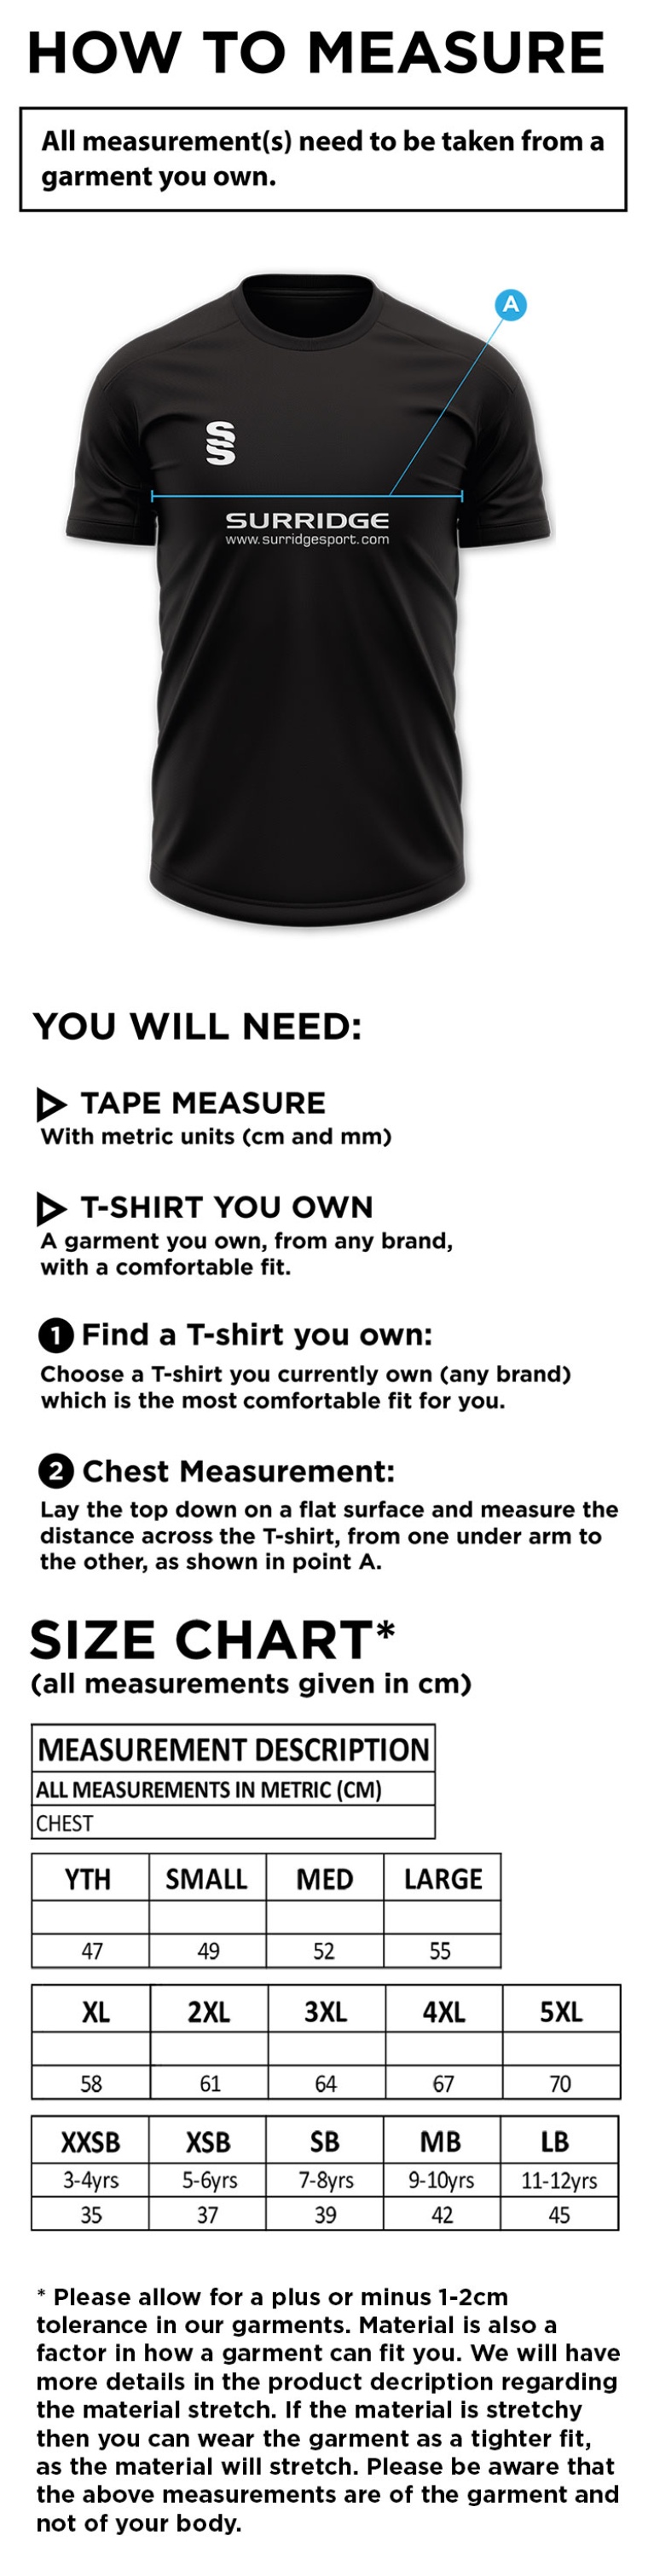 Youth's Camo Games Shirt : Amber - Size Guide